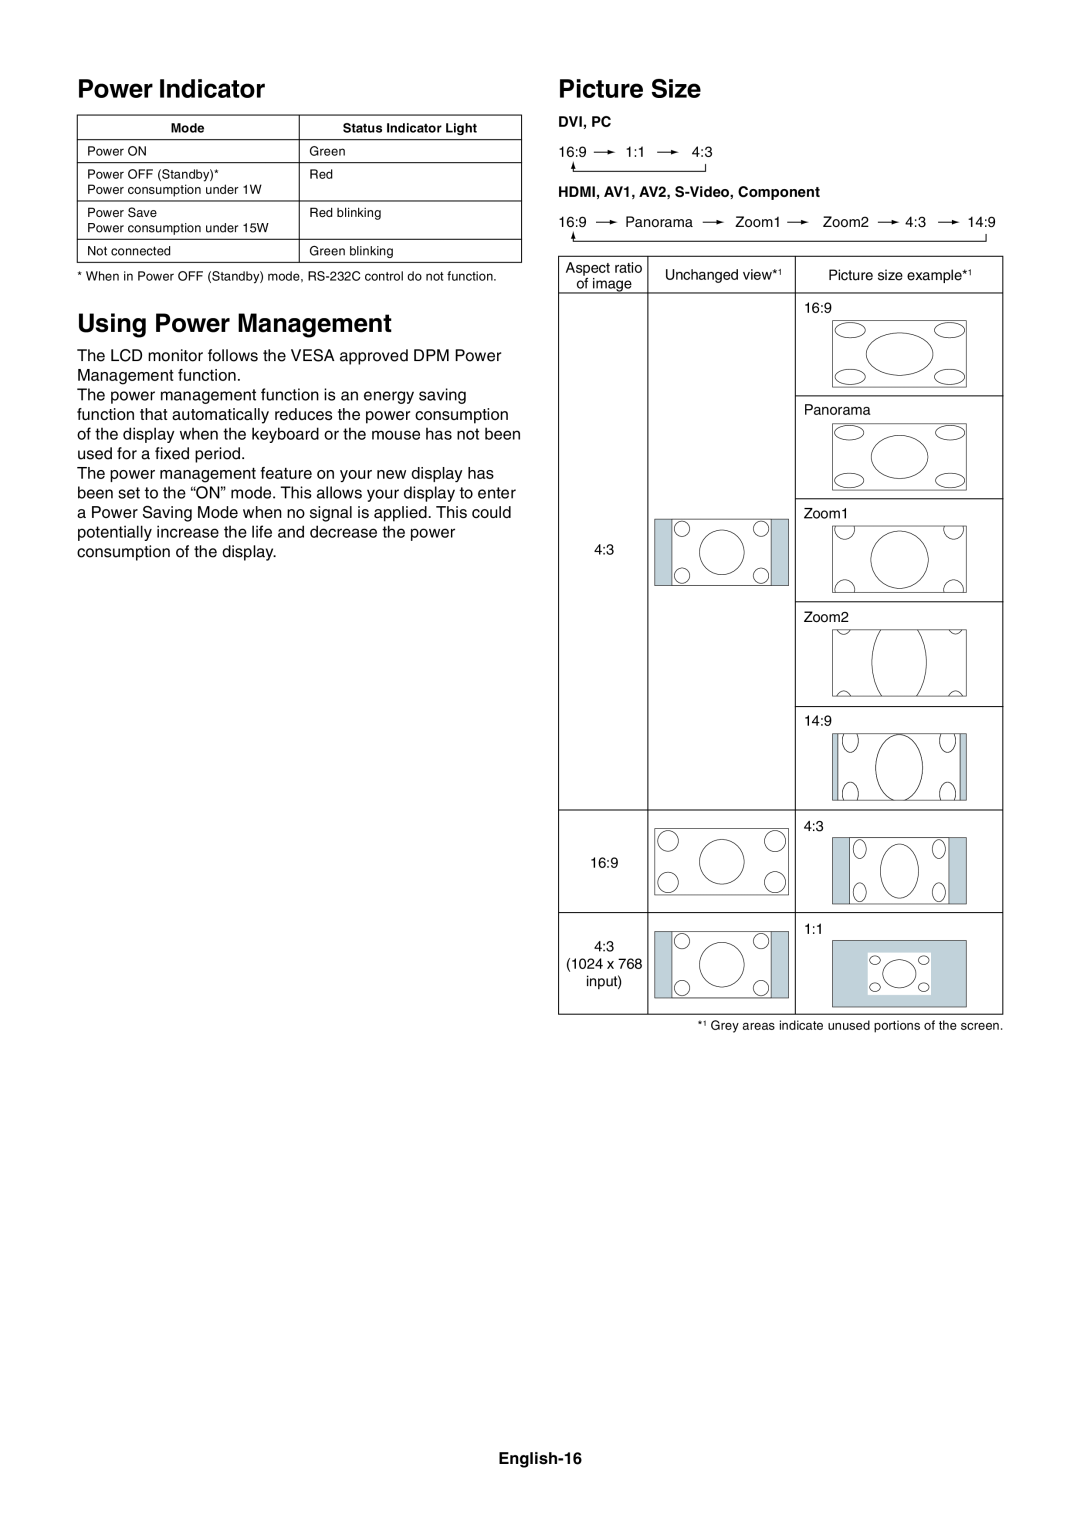 NEC LCD8205-P user manual Power Indicator, Using Power Management, Picture Size, English-16 